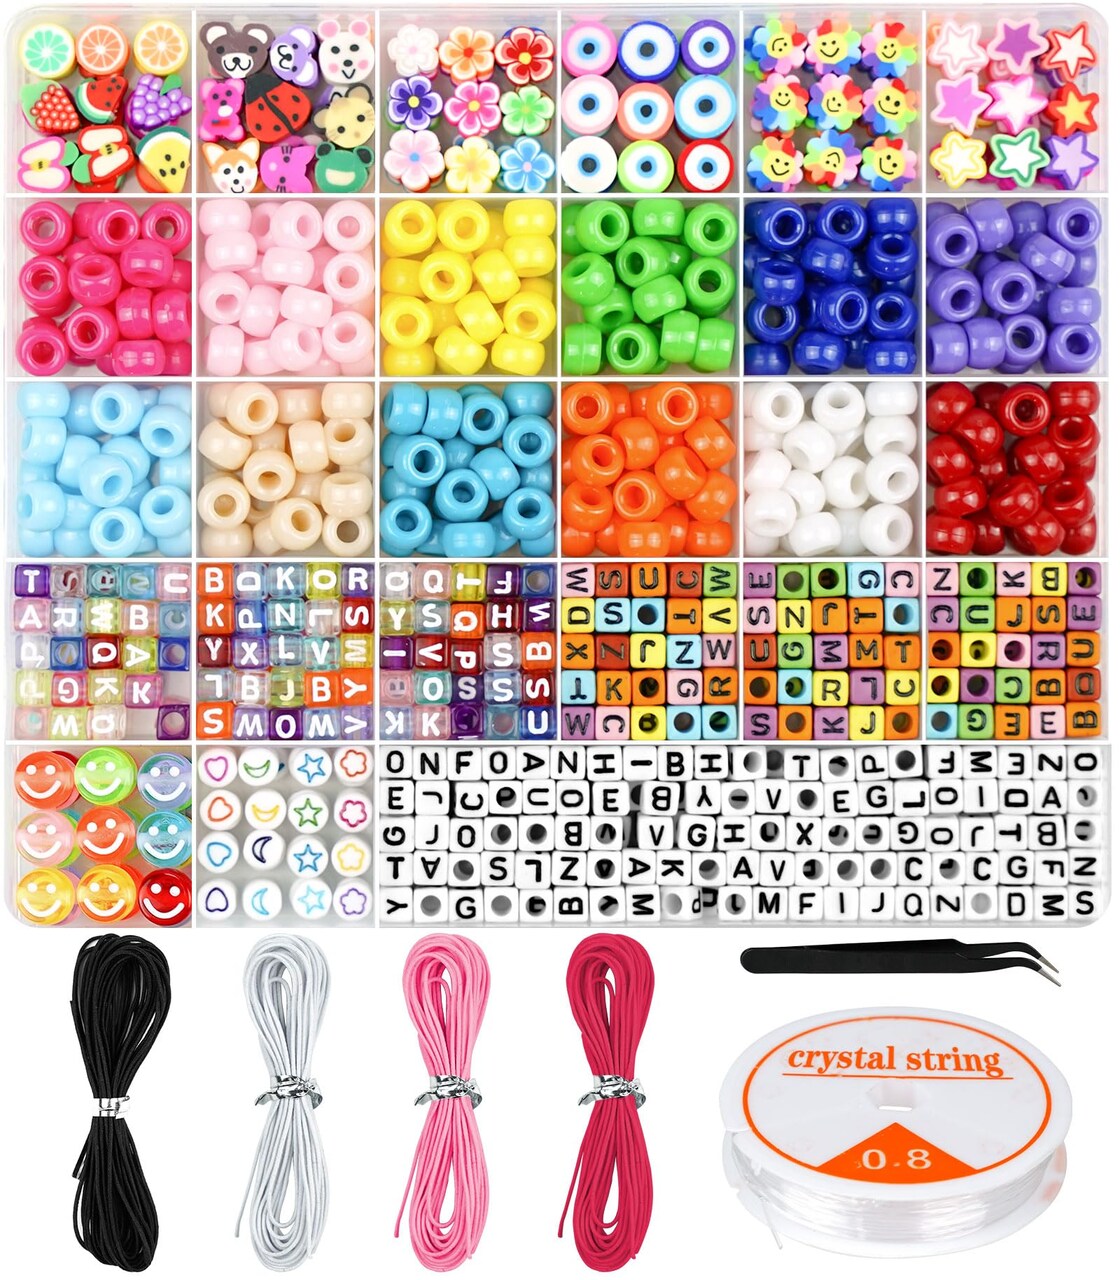 Dowsabel Bracelet Making Kit, Beads for Bracelets Making Pony Beads Polymer  Clay Beads Smile Face Beads Letter Beads for Jewelry Making, DIY Arts and  Crafts Gifts for Girls Age 6 7 8 9 10-12